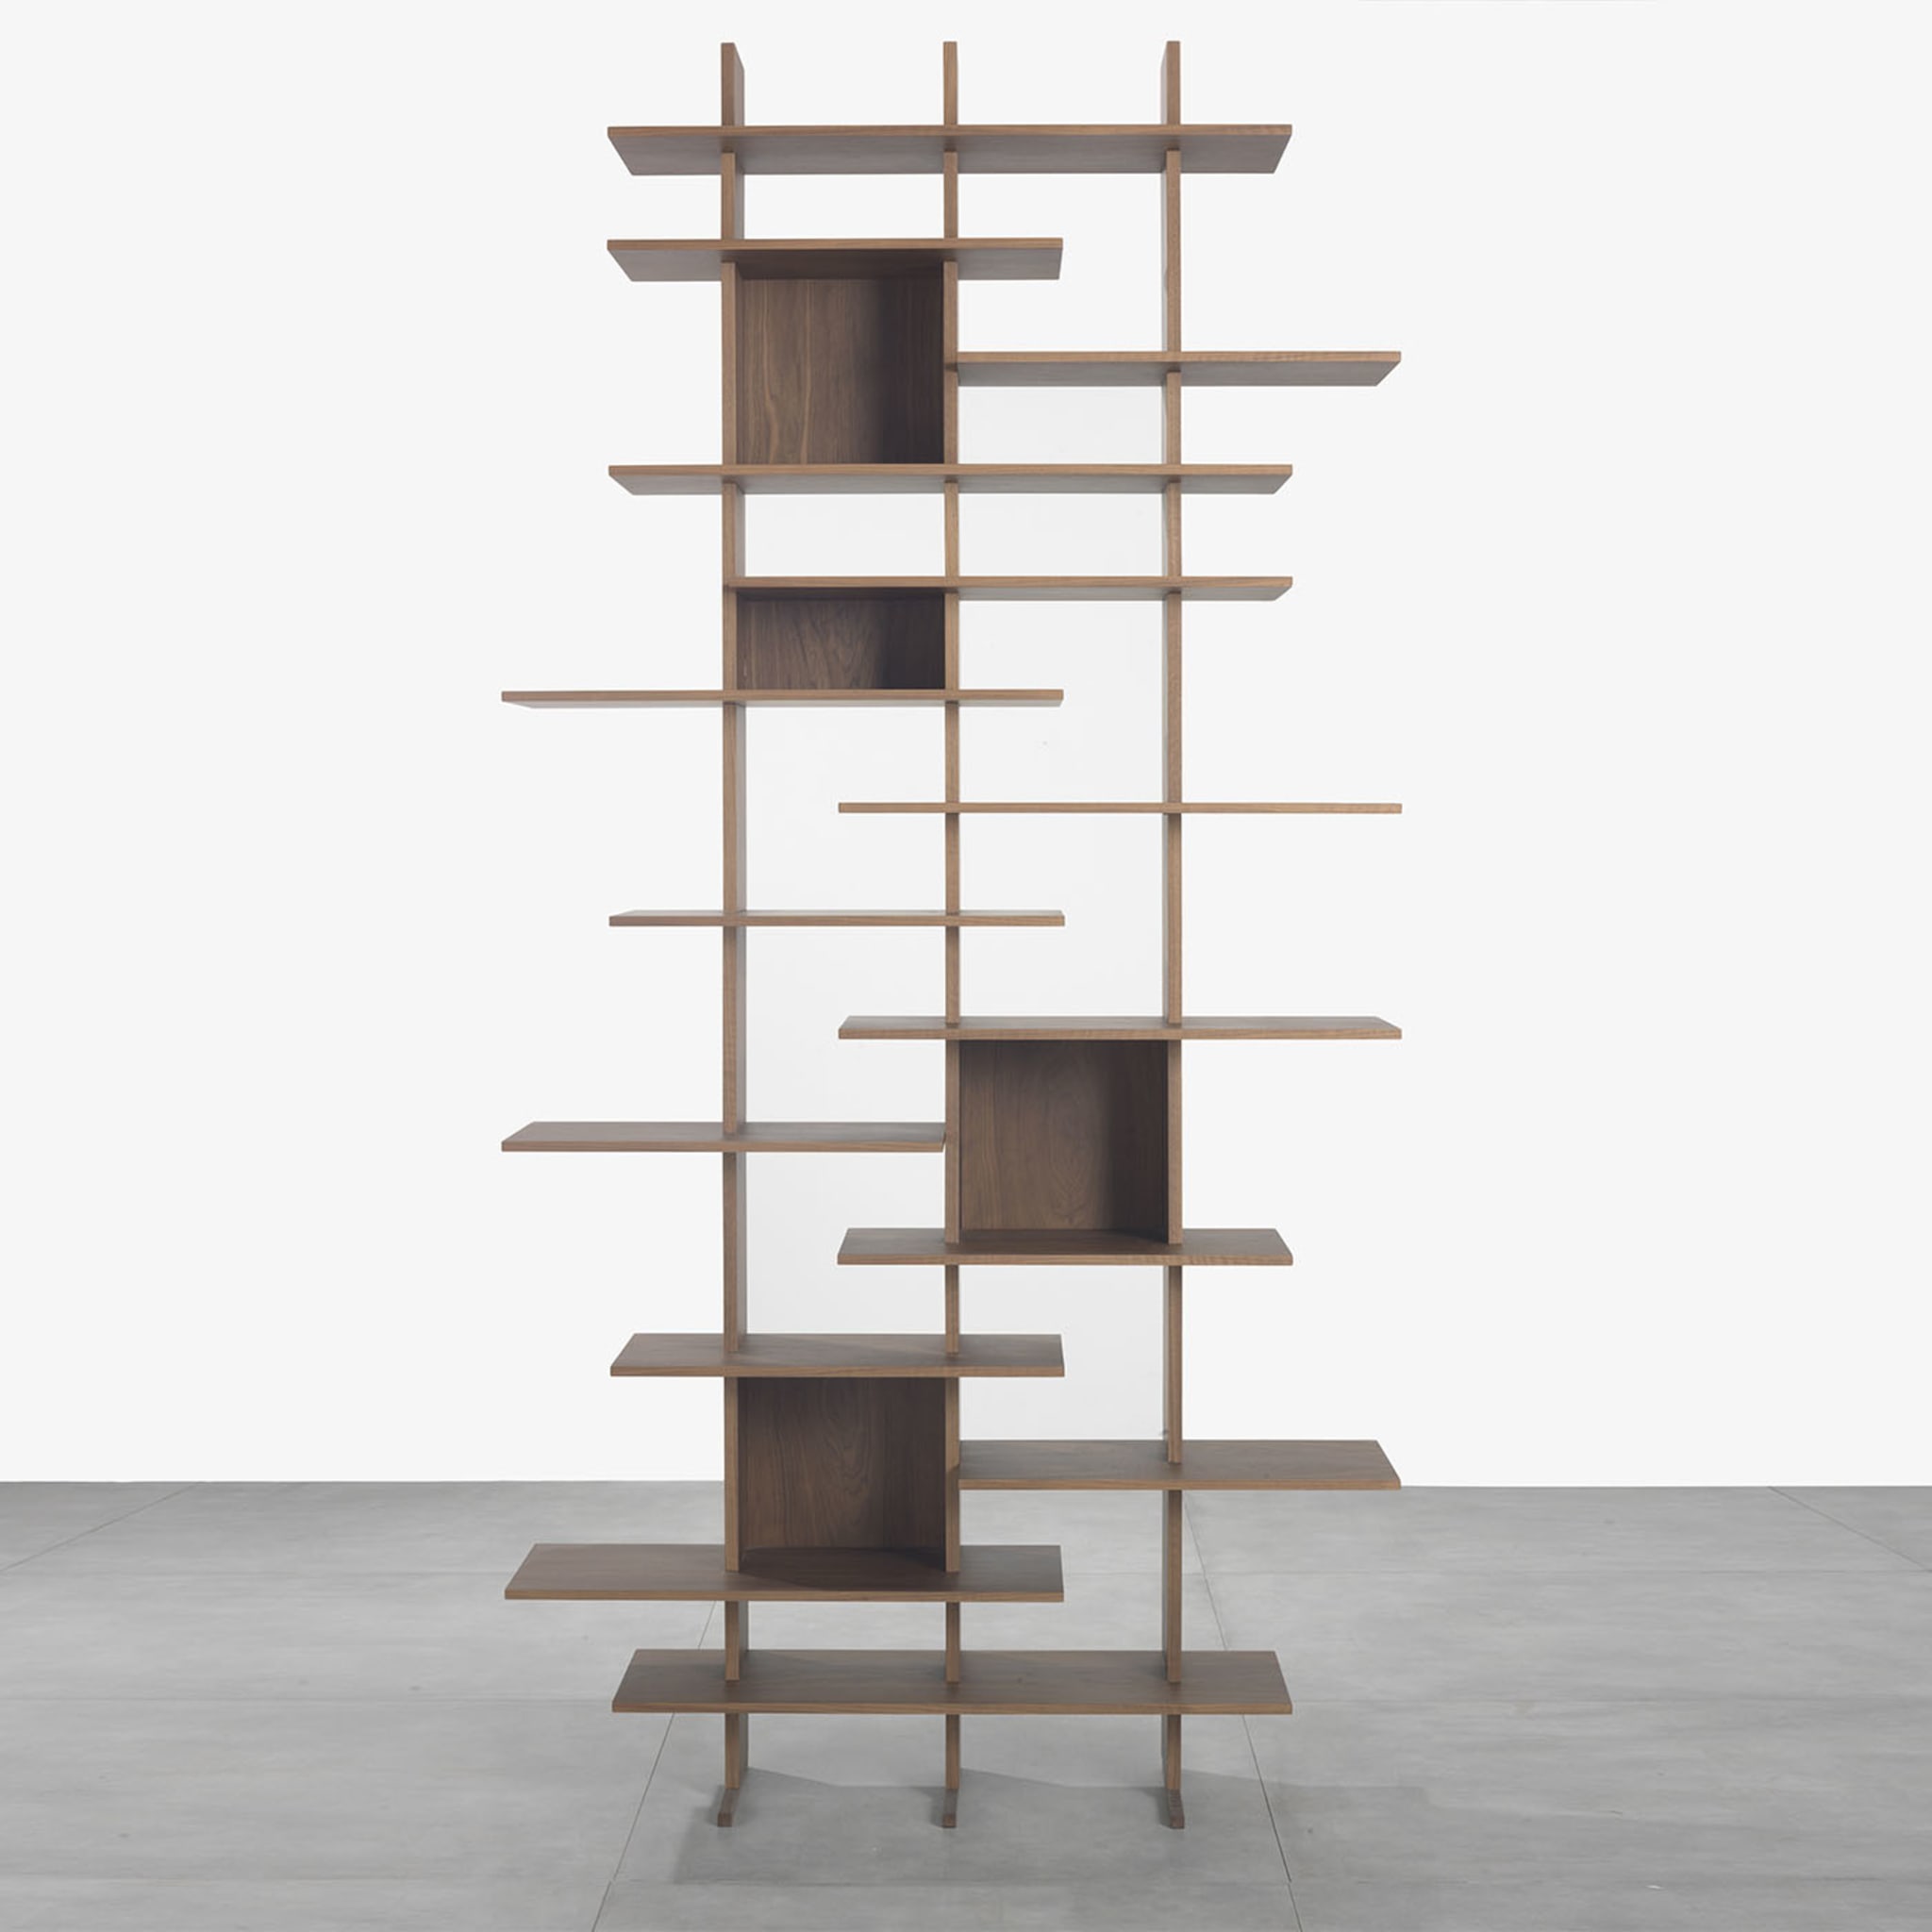 Elisabeth Bookcase #2 by Cesare Arosio and Beatrice Fanchini - Alternative view 1